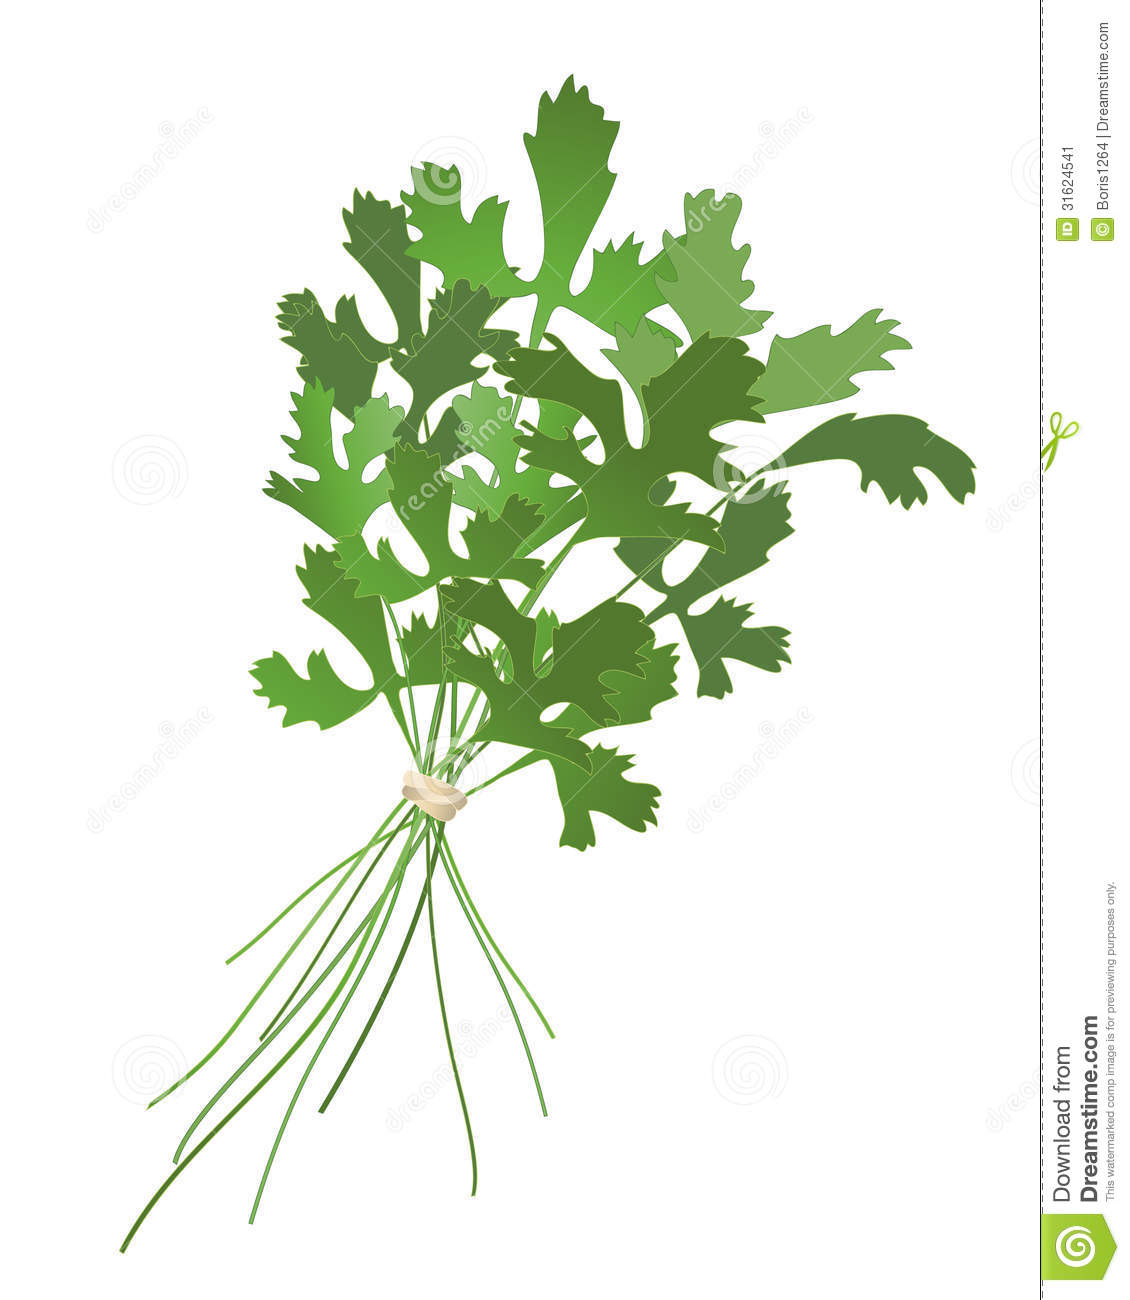 An Illustration Of A Bunch Of Cilantro Isolated On A White Background